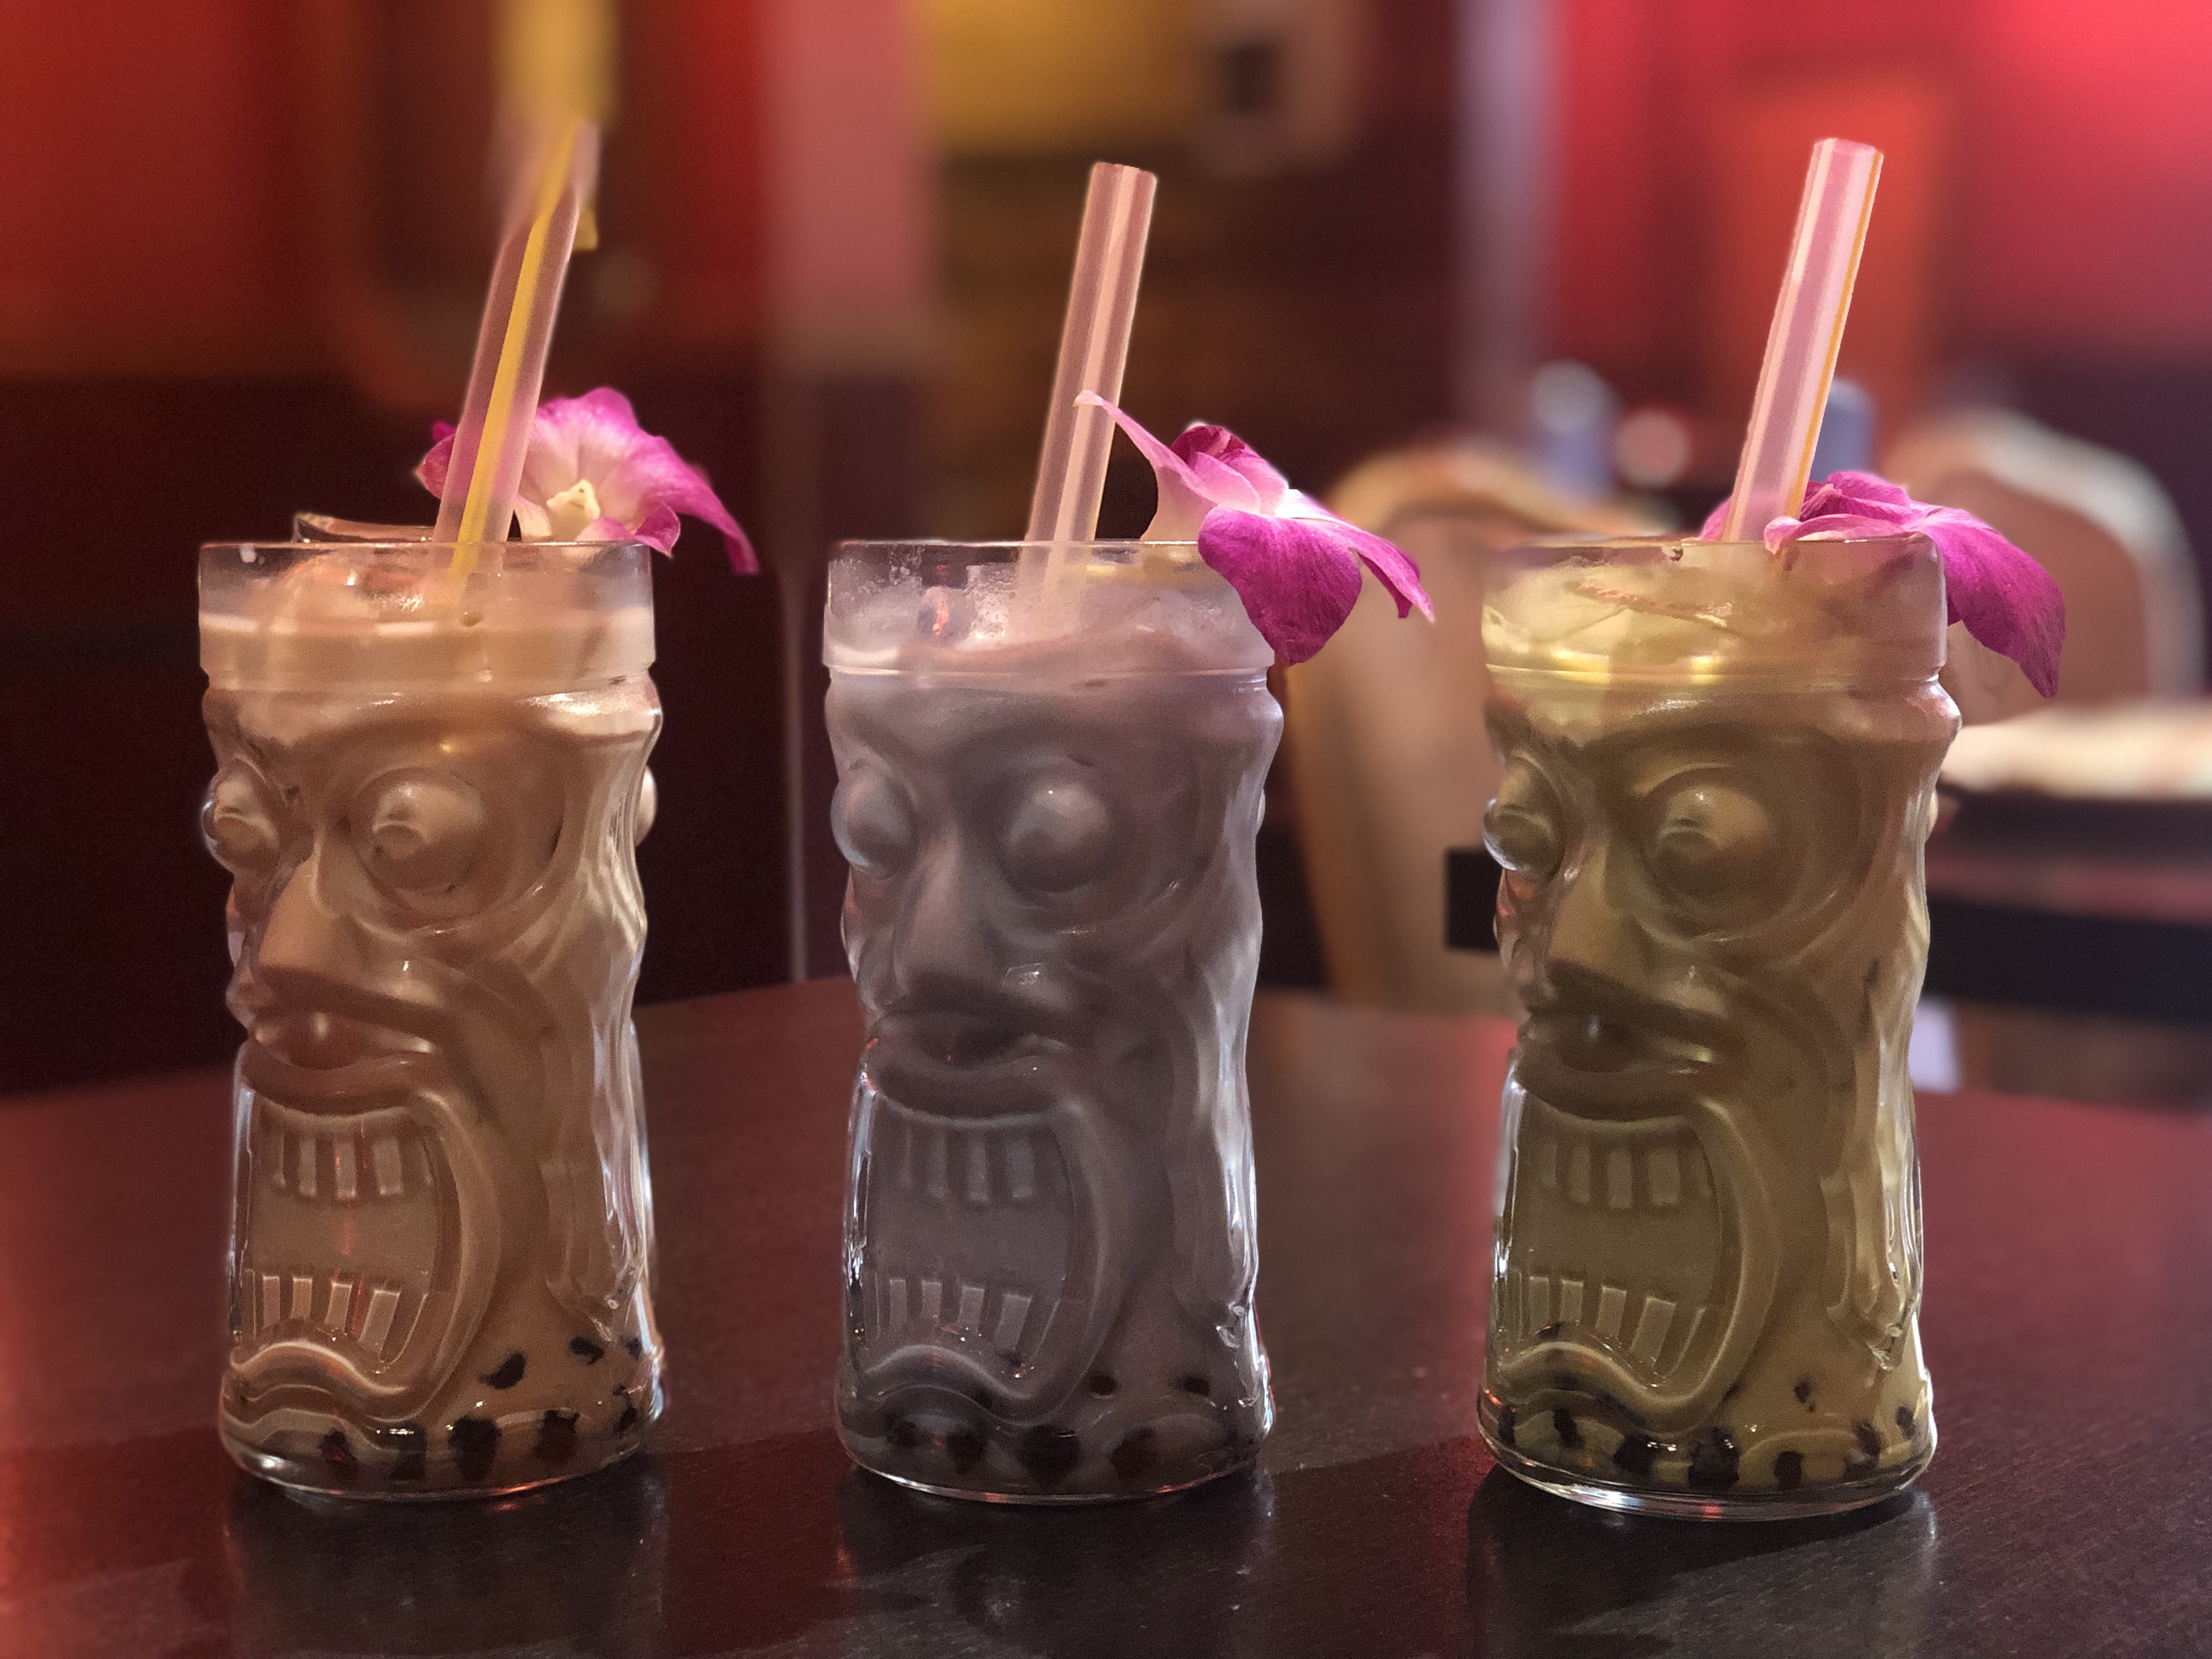 A row of three clear glass Tiki mugs with boozy boba cocktails in three colors. Each mug is garnished with an orchid and colored straw.